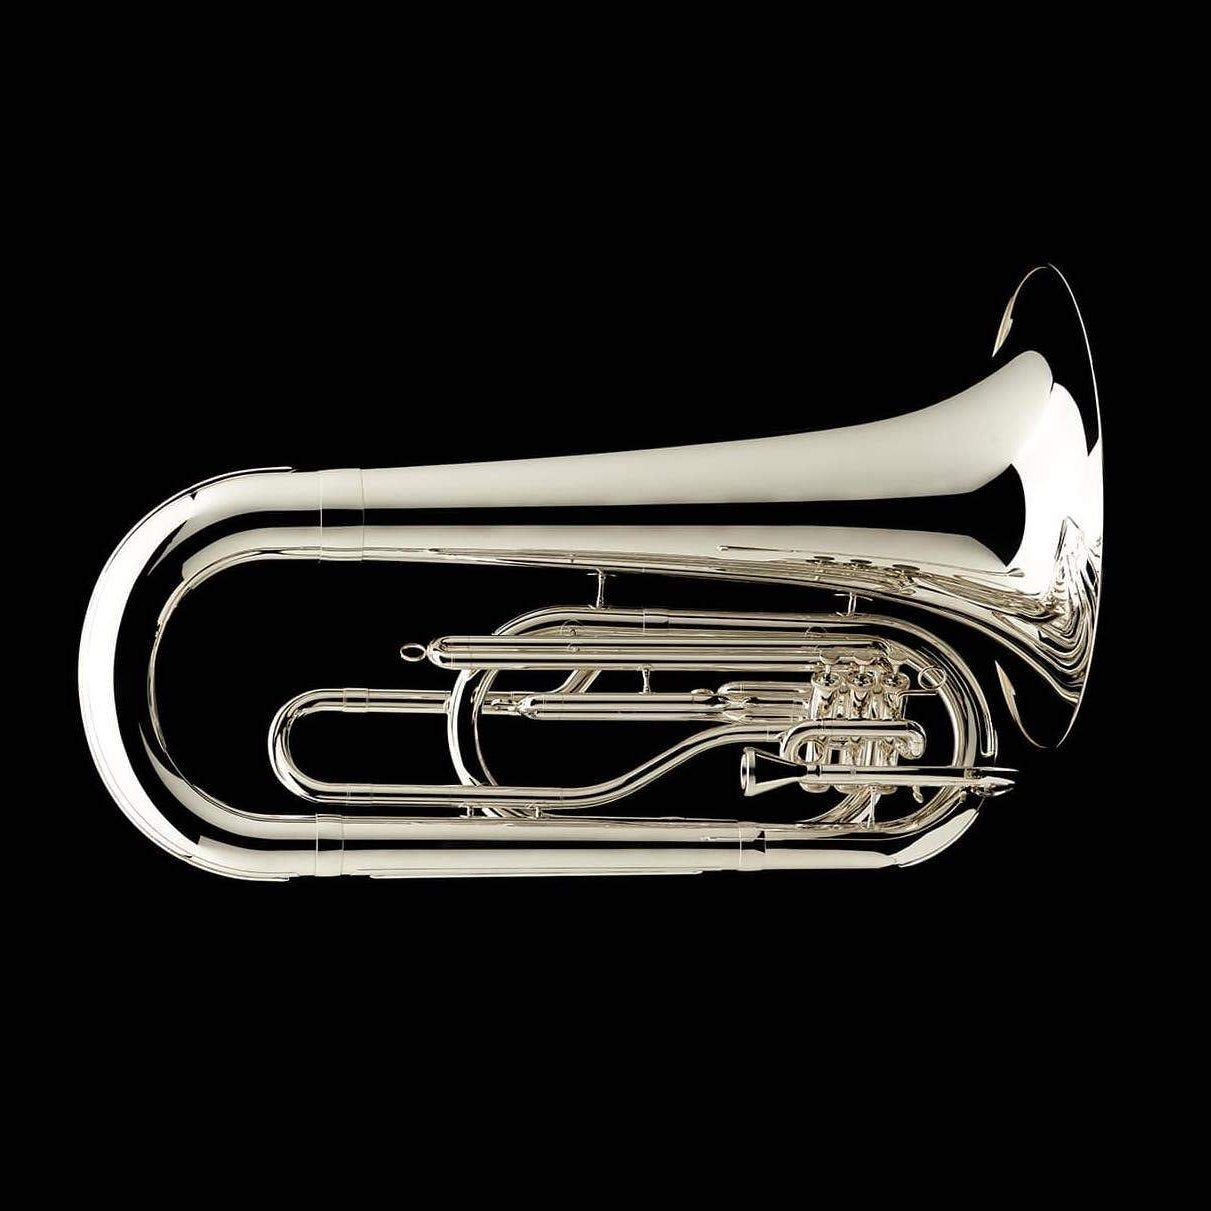 An image of a BBb 4/4 Marching Contra (tuba) in silver-plate from Wessex Tubas, facing right